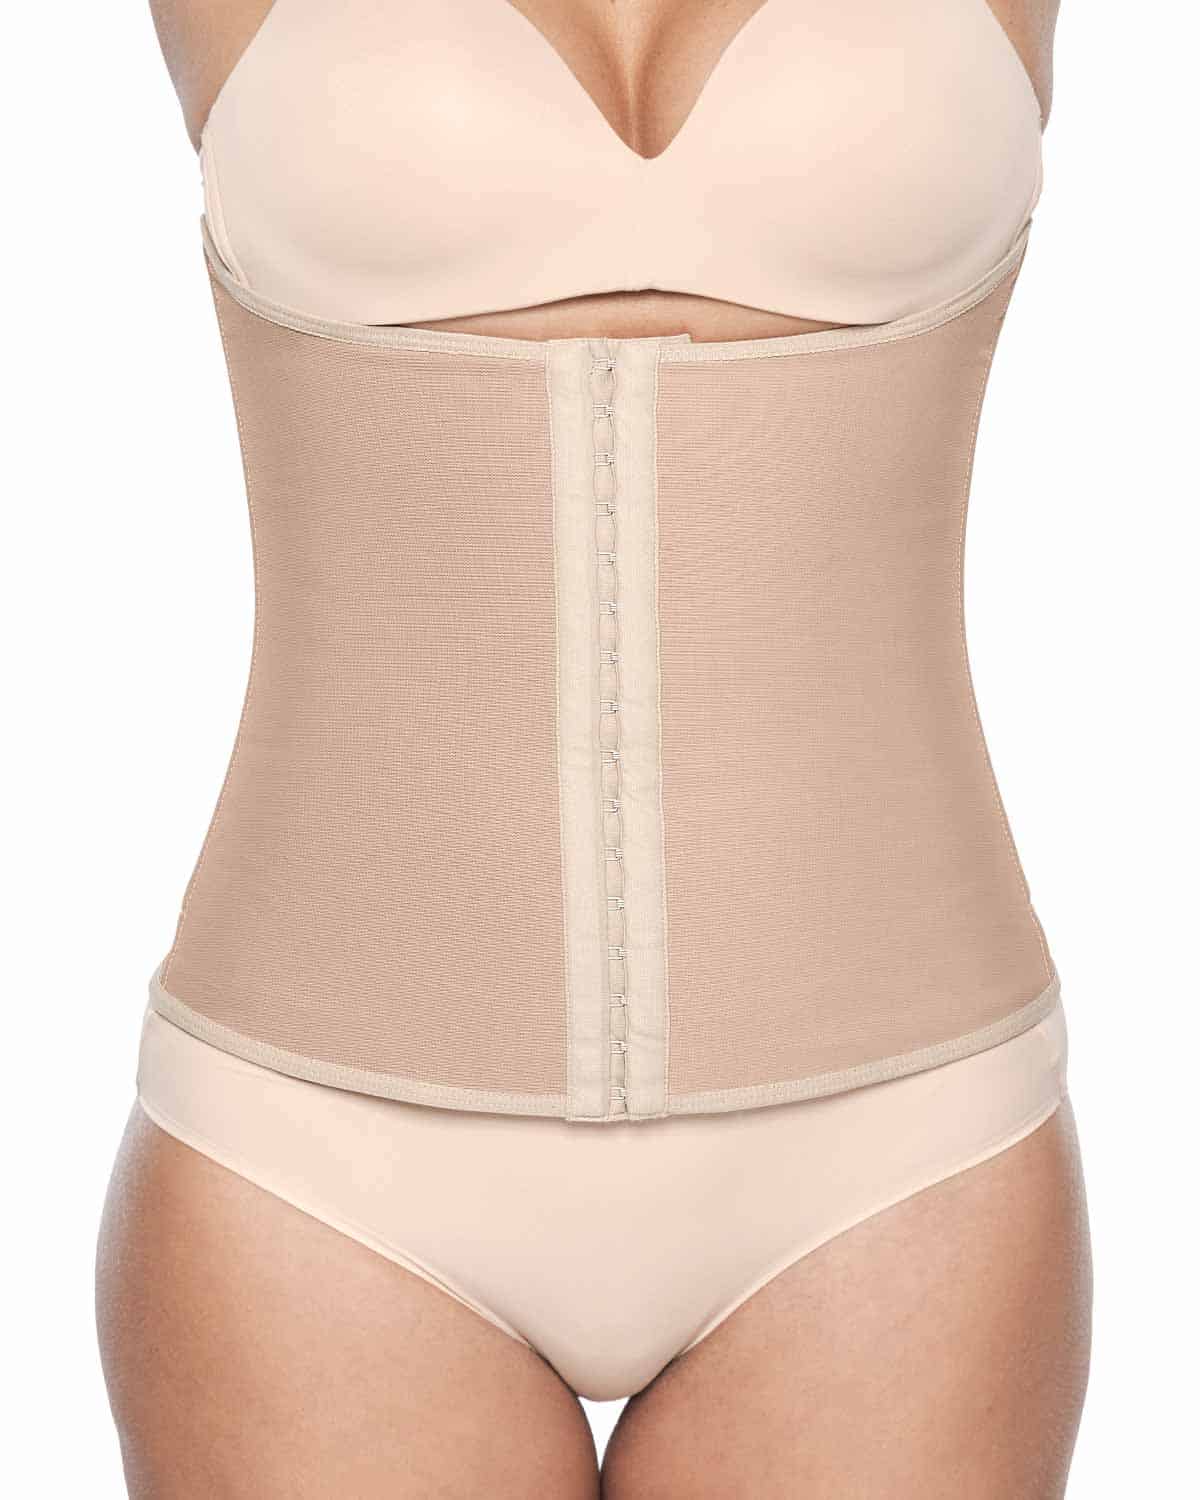 The Top Benefits Of Wearing A Postpartum Abdominal Binder, 53% OFF